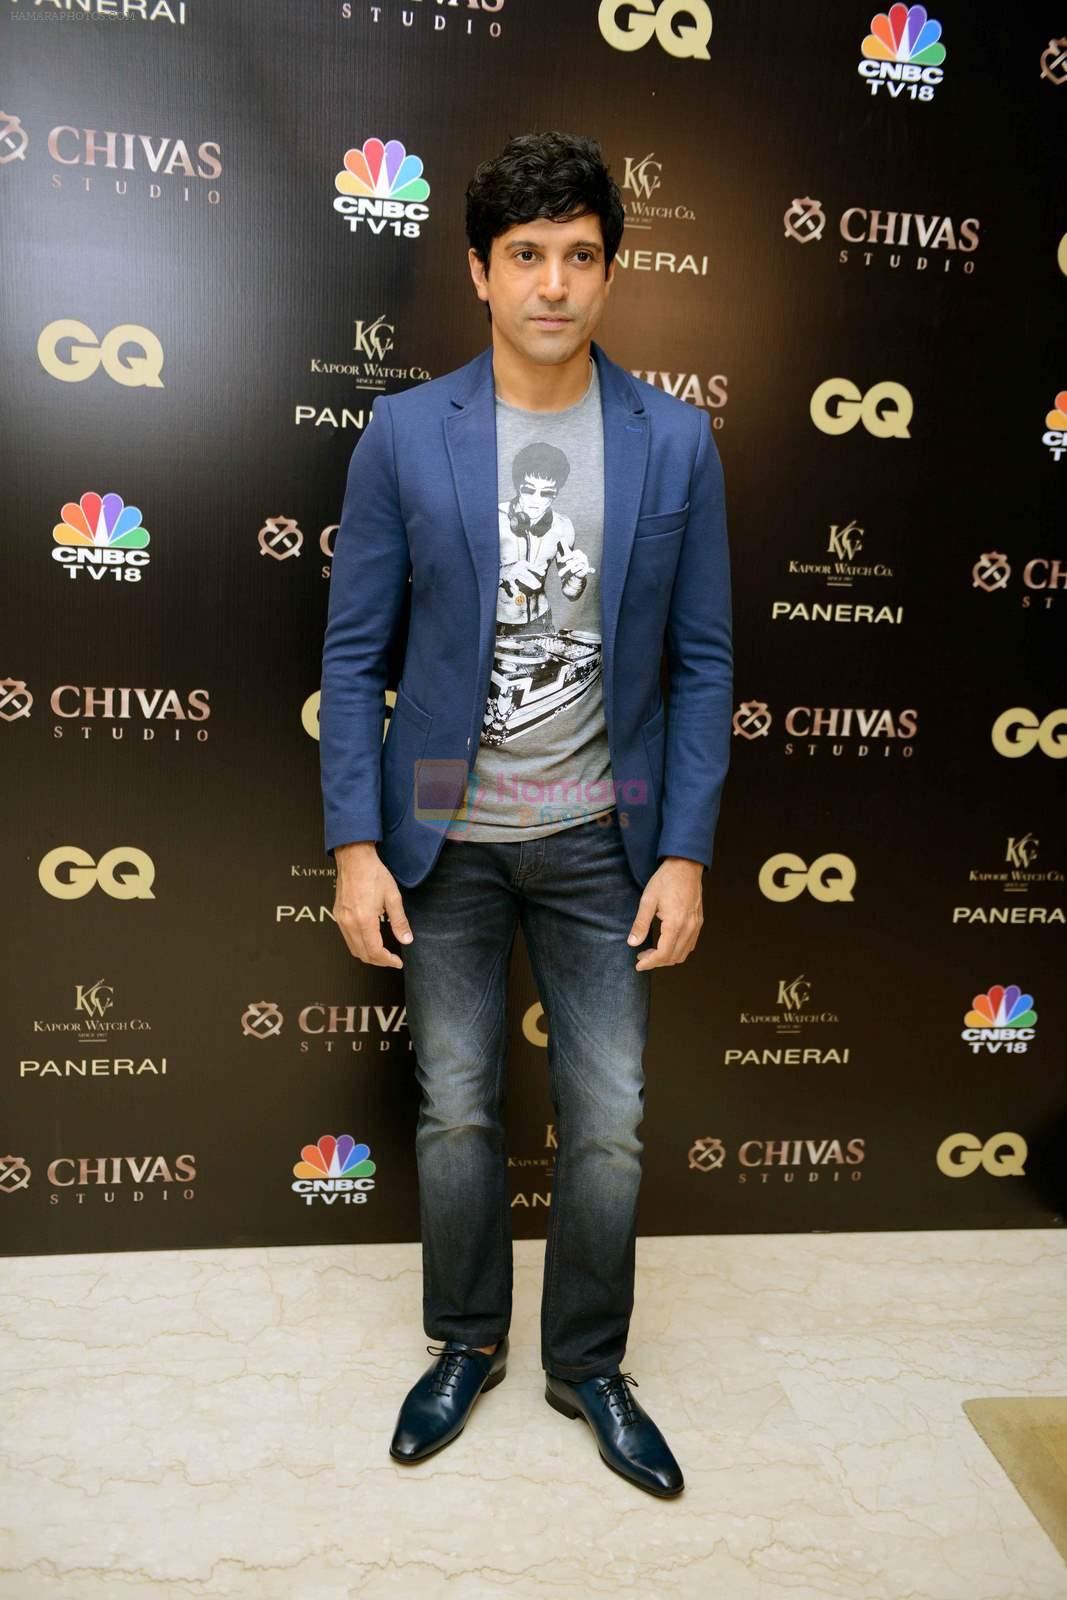 Farhan Akhtar at GQ THE 50 Most Influential Young Indians event in Gurgaon on 3rd July 2015